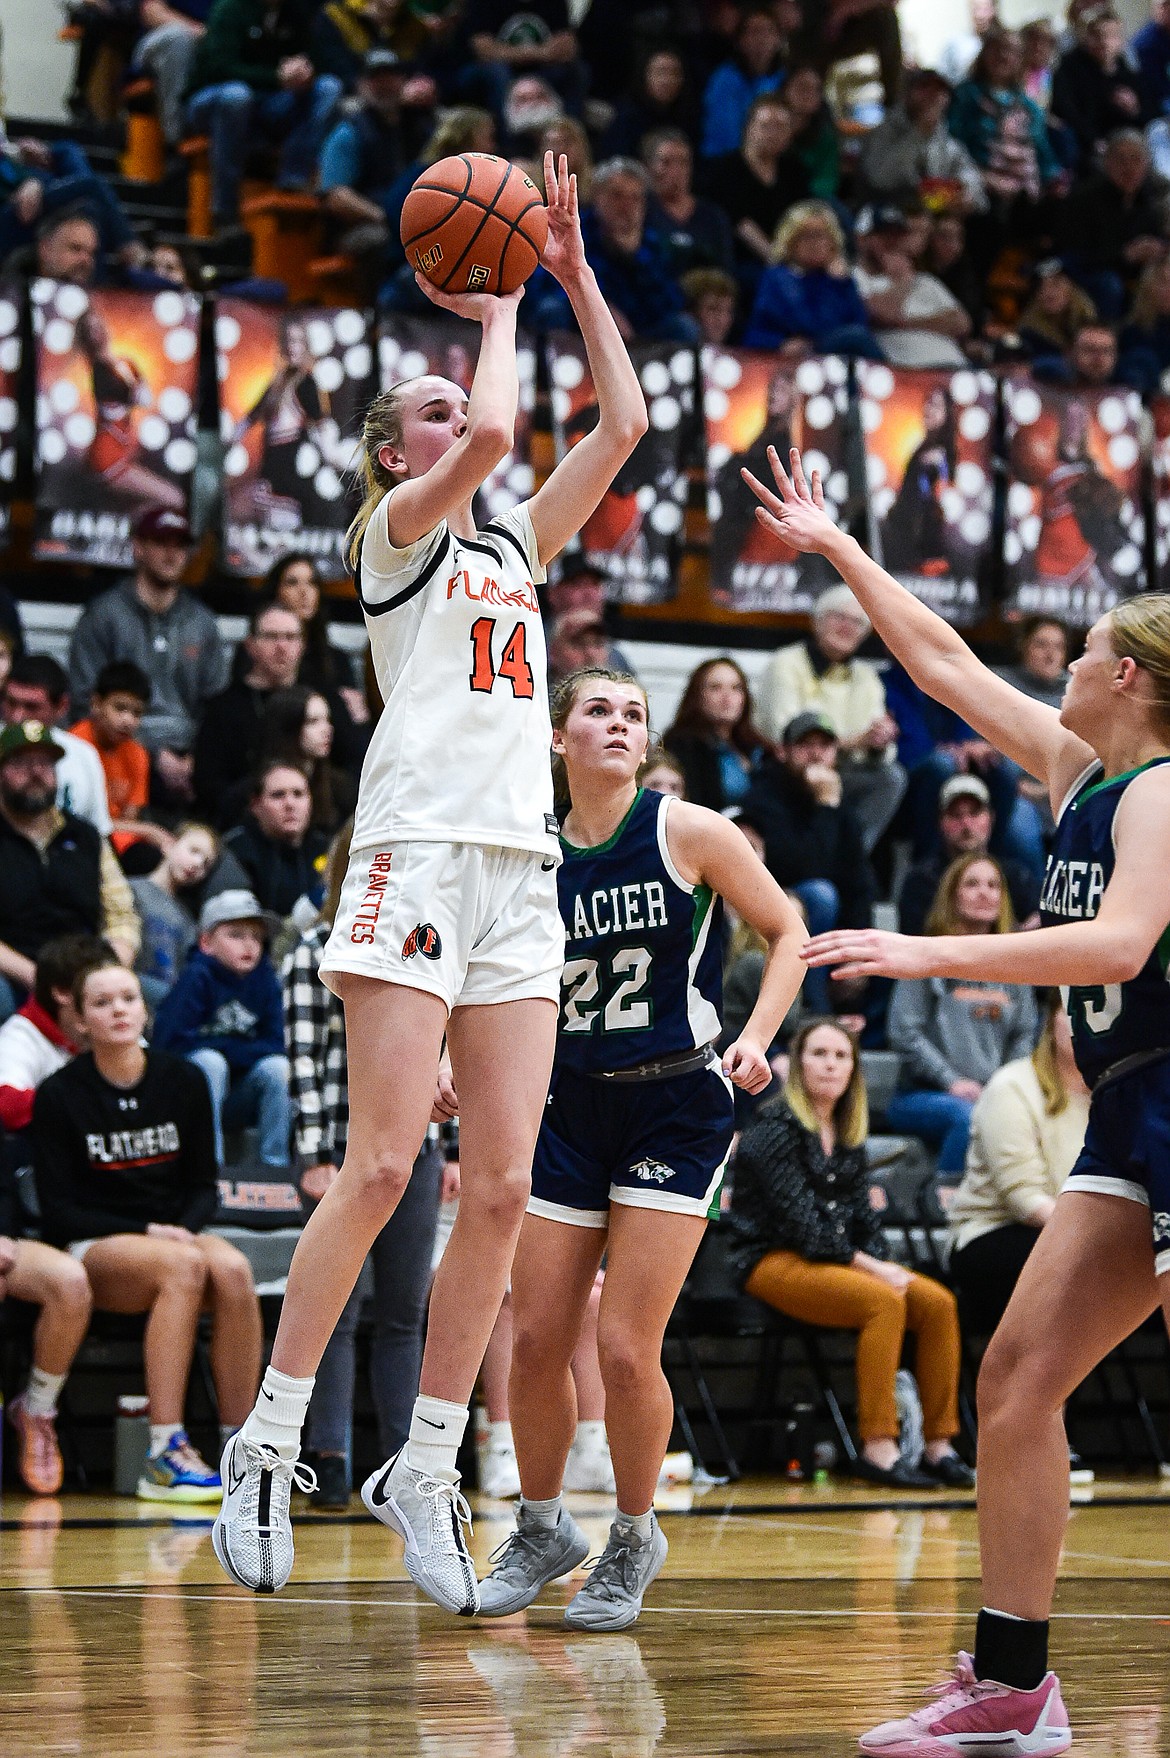 Flathead's Kennedy Moore (14) shoots in the second half against Glacier at Flathead High School on Friday, Jan. 19. (Casey Kreider/Daily Inter Lake)